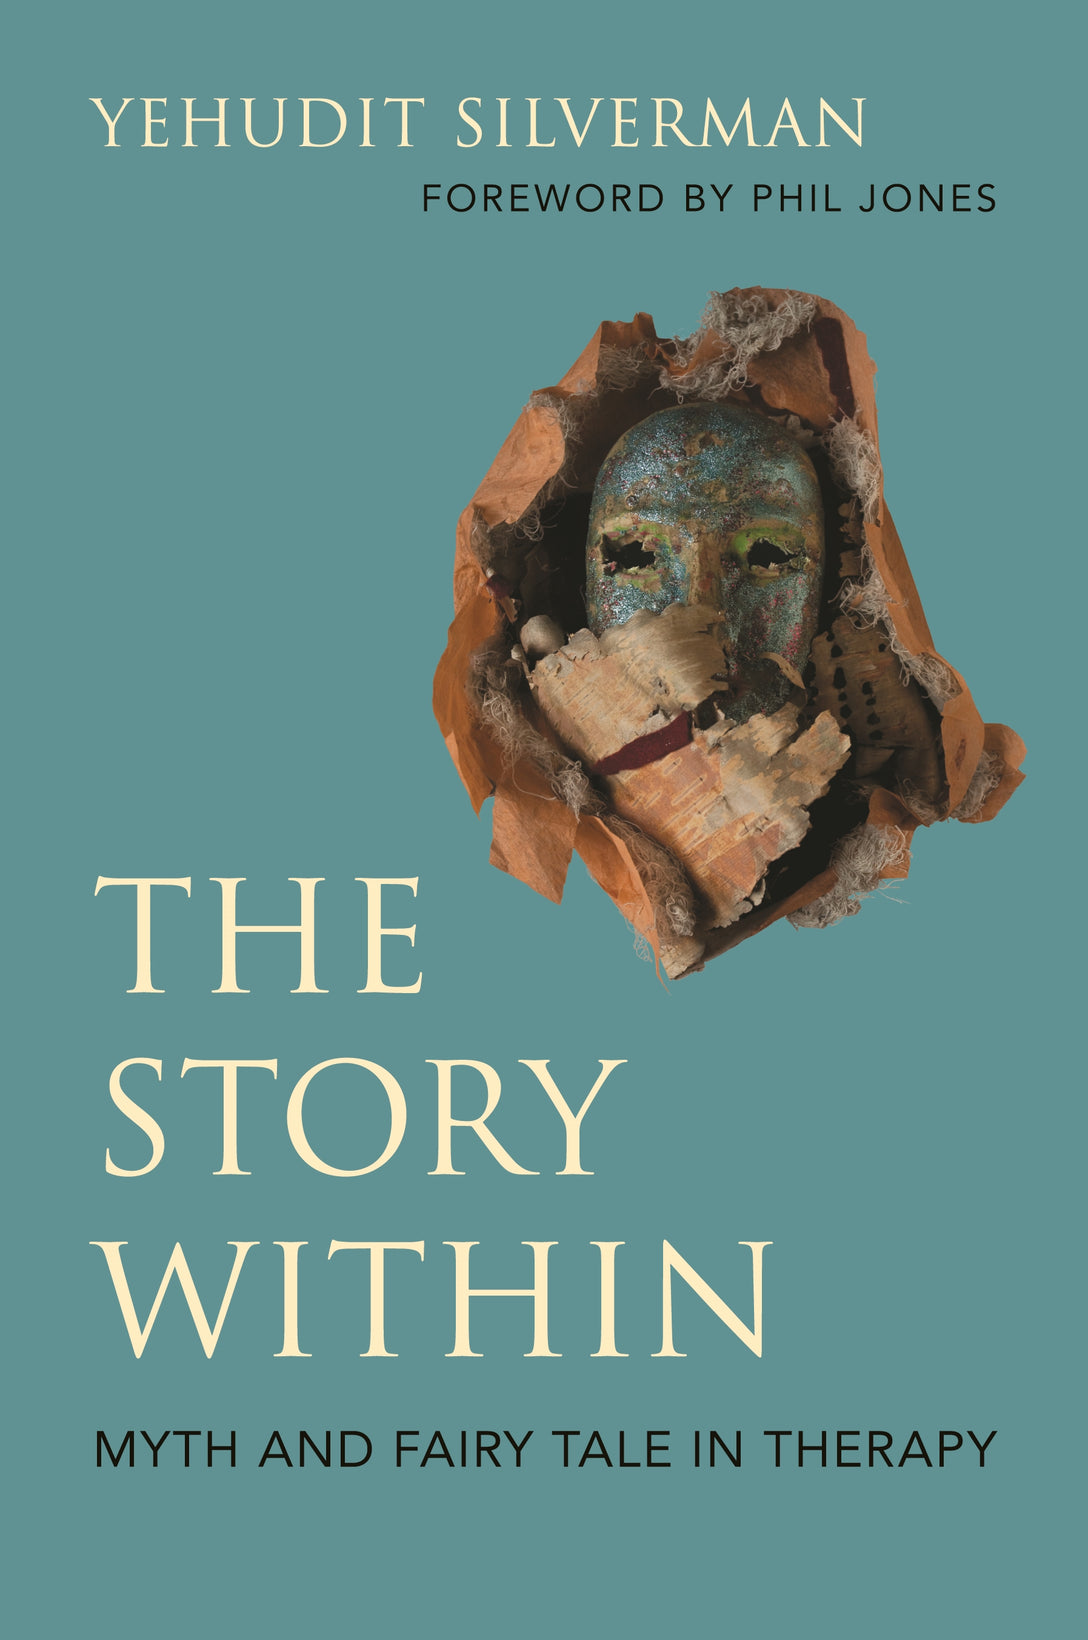 The Story Within - Myth and Fairy Tale in Therapy by Phil Jones, Yehudit Silverman